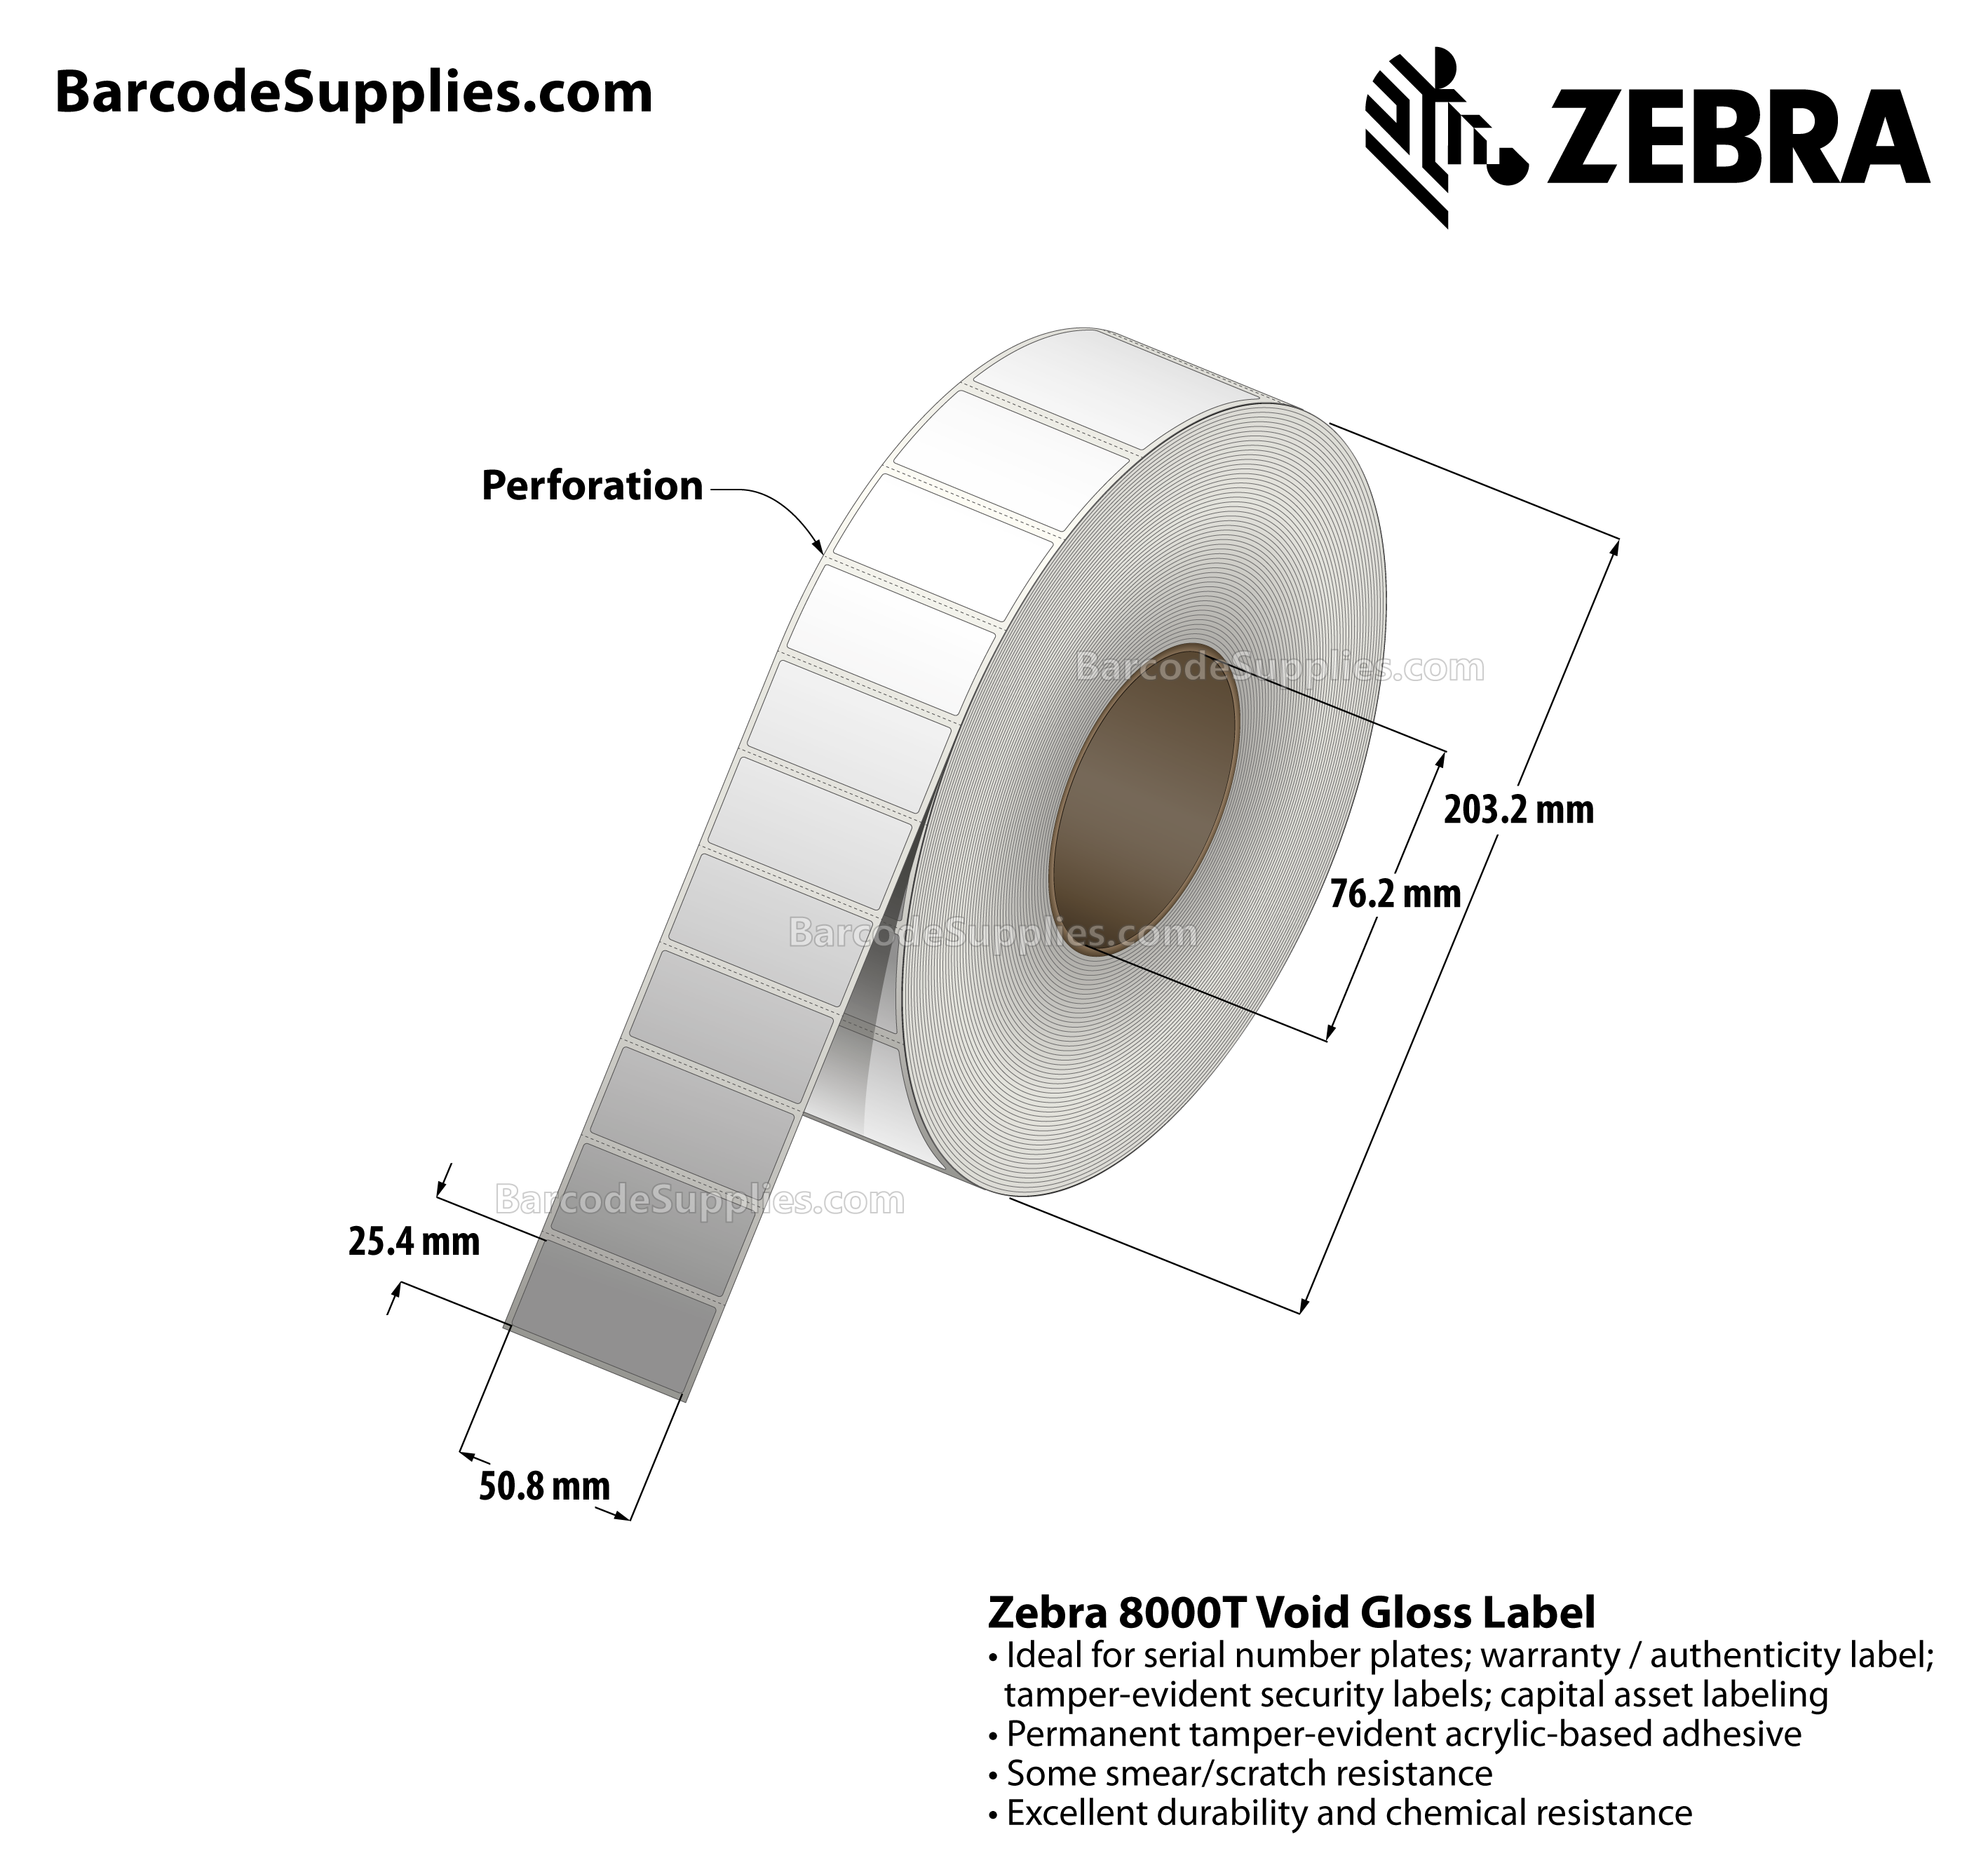 2 x 1 Thermal Transfer White 8000T Void Gloss Labels With Tamper-evident Adhesive - Perforated - 3000 Labels Per Roll - Carton Of 1 Rolls - 3000 Labels Total - MPN: 10023259